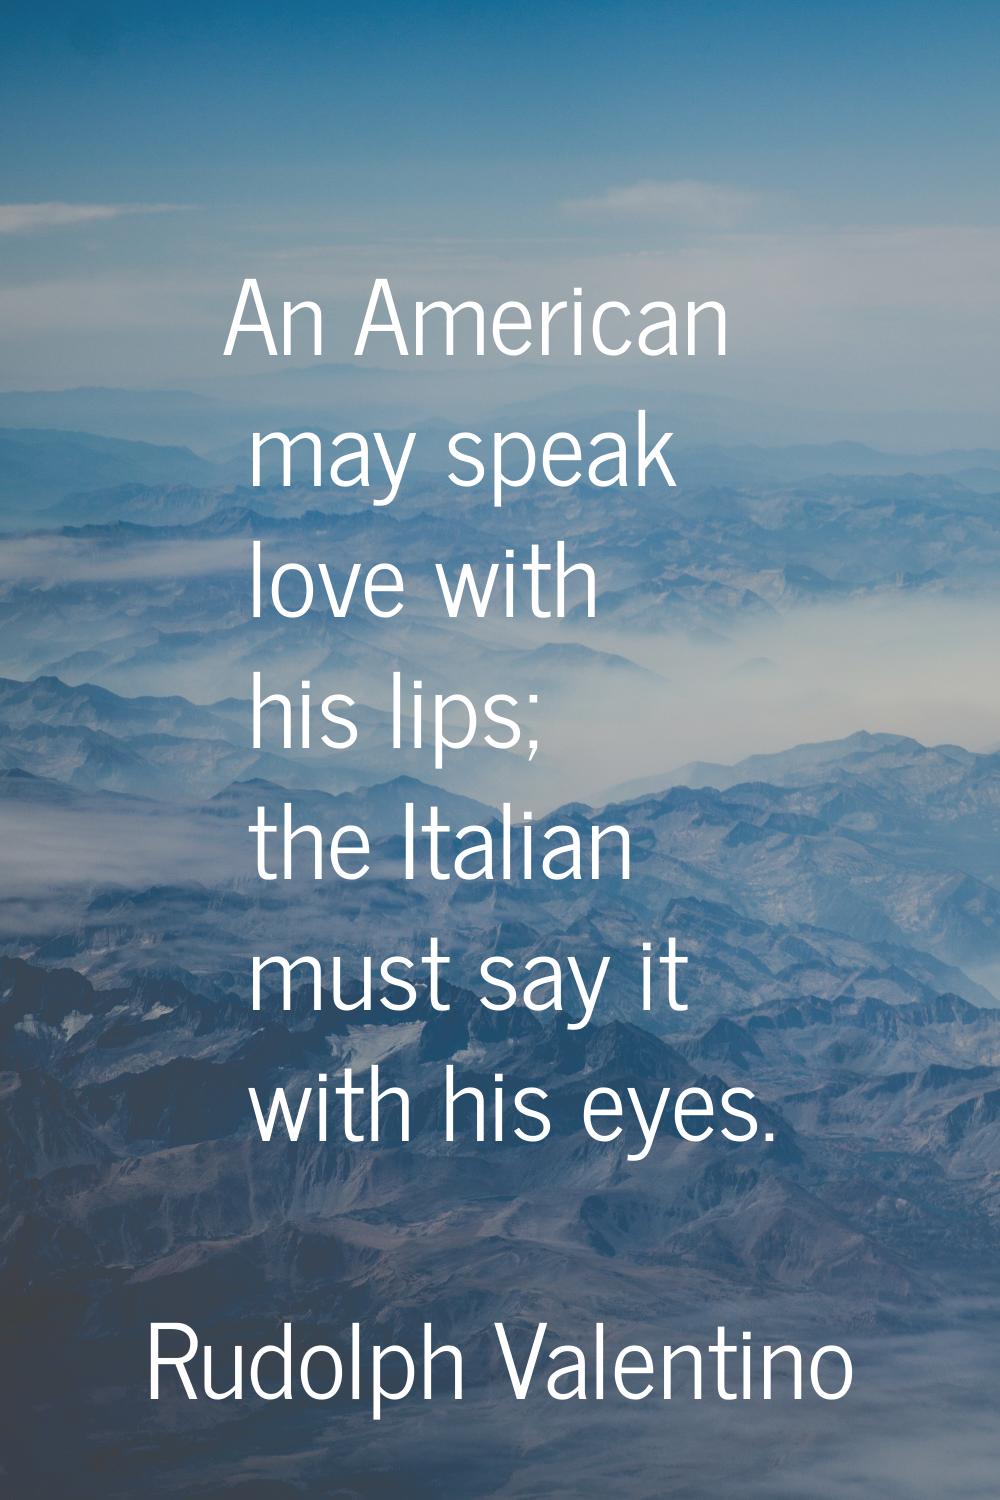 An American may speak love with his lips; the Italian must say it with his eyes.